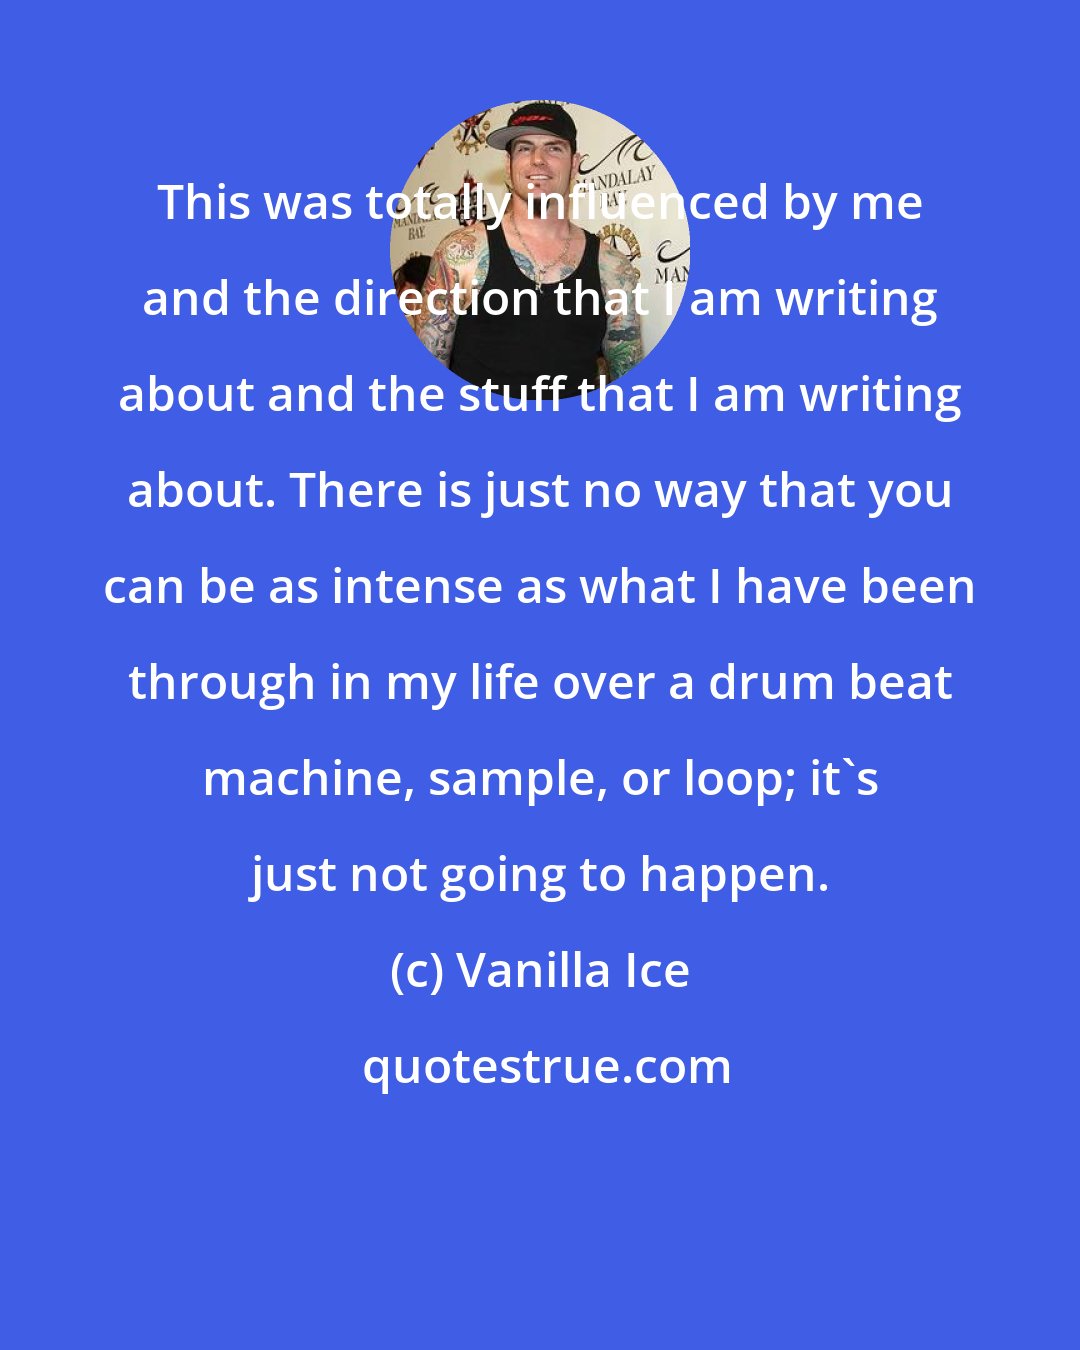 Vanilla Ice: This was totally influenced by me and the direction that I am writing about and the stuff that I am writing about. There is just no way that you can be as intense as what I have been through in my life over a drum beat machine, sample, or loop; it's just not going to happen.